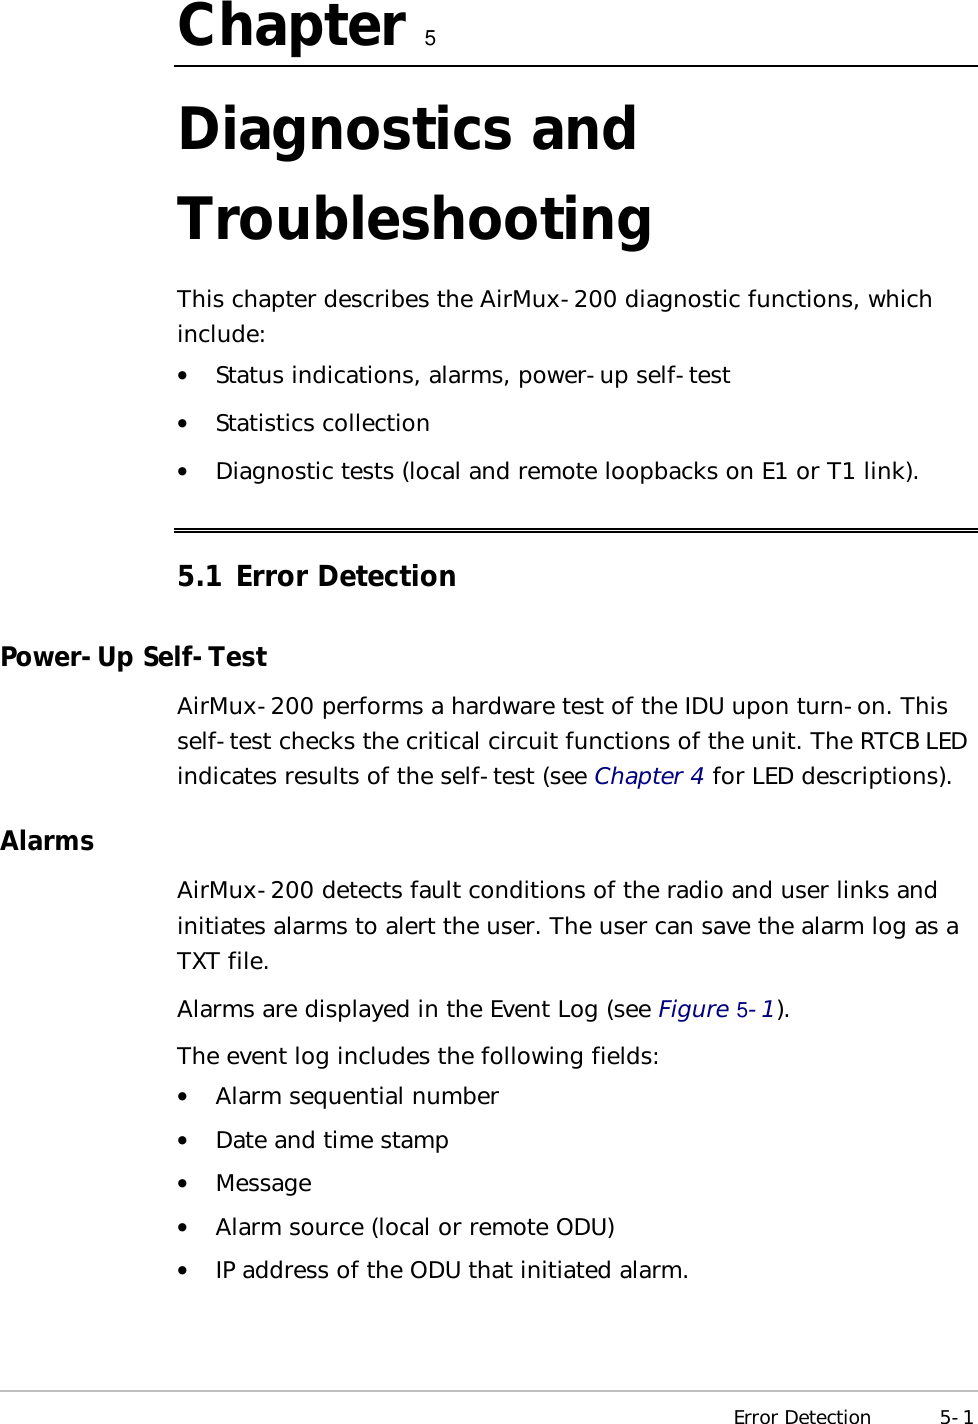  Error Detection 5-1 Chapter   5 Diagnostics and Troubleshooting This chapter describes the AirMux-200 diagnostic functions, which include: •  Status indications, alarms, power-up self-test •  Statistics collection •  Diagnostic tests (local and remote loopbacks on E1 or T1 link). 5.1 Error Detection Power-Up Self-Test AirMux-200 performs a hardware test of the IDU upon turn-on. This self-test checks the critical circuit functions of the unit. The RTCB LED indicates results of the self-test (see Chapter 4 for LED descriptions). Alarms AirMux-200 detects fault conditions of the radio and user links and initiates alarms to alert the user. The user can save the alarm log as a TXT file. Alarms are displayed in the Event Log (see Figure   5-1). The event log includes the following fields: •  Alarm sequential number •  Date and time stamp •  Message •  Alarm source (local or remote ODU) •  IP address of the ODU that initiated alarm. 